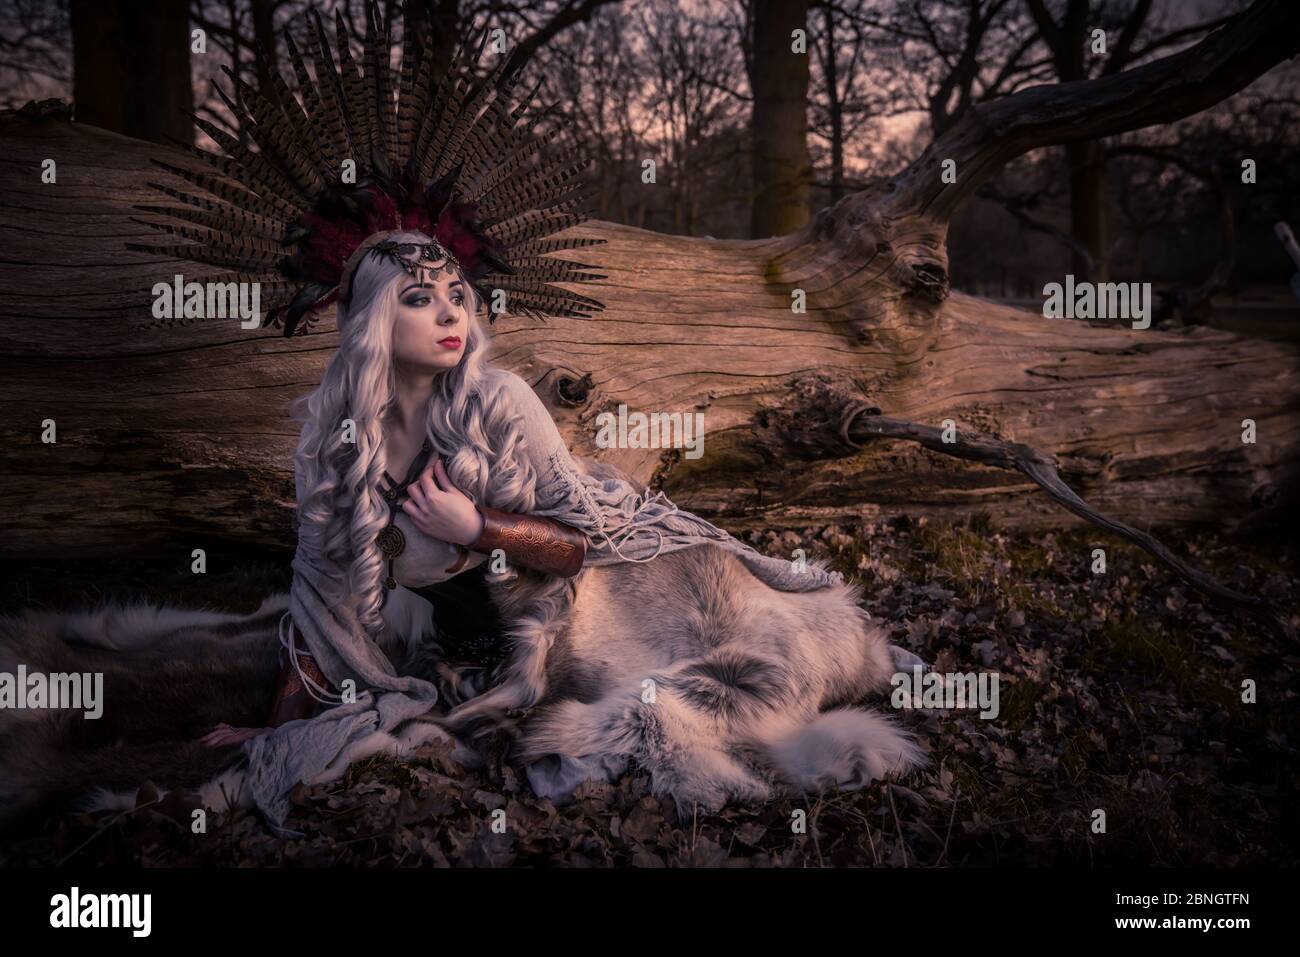 The Shamanic Priestess practices her rituals and arts at the close of the day Stock Photo